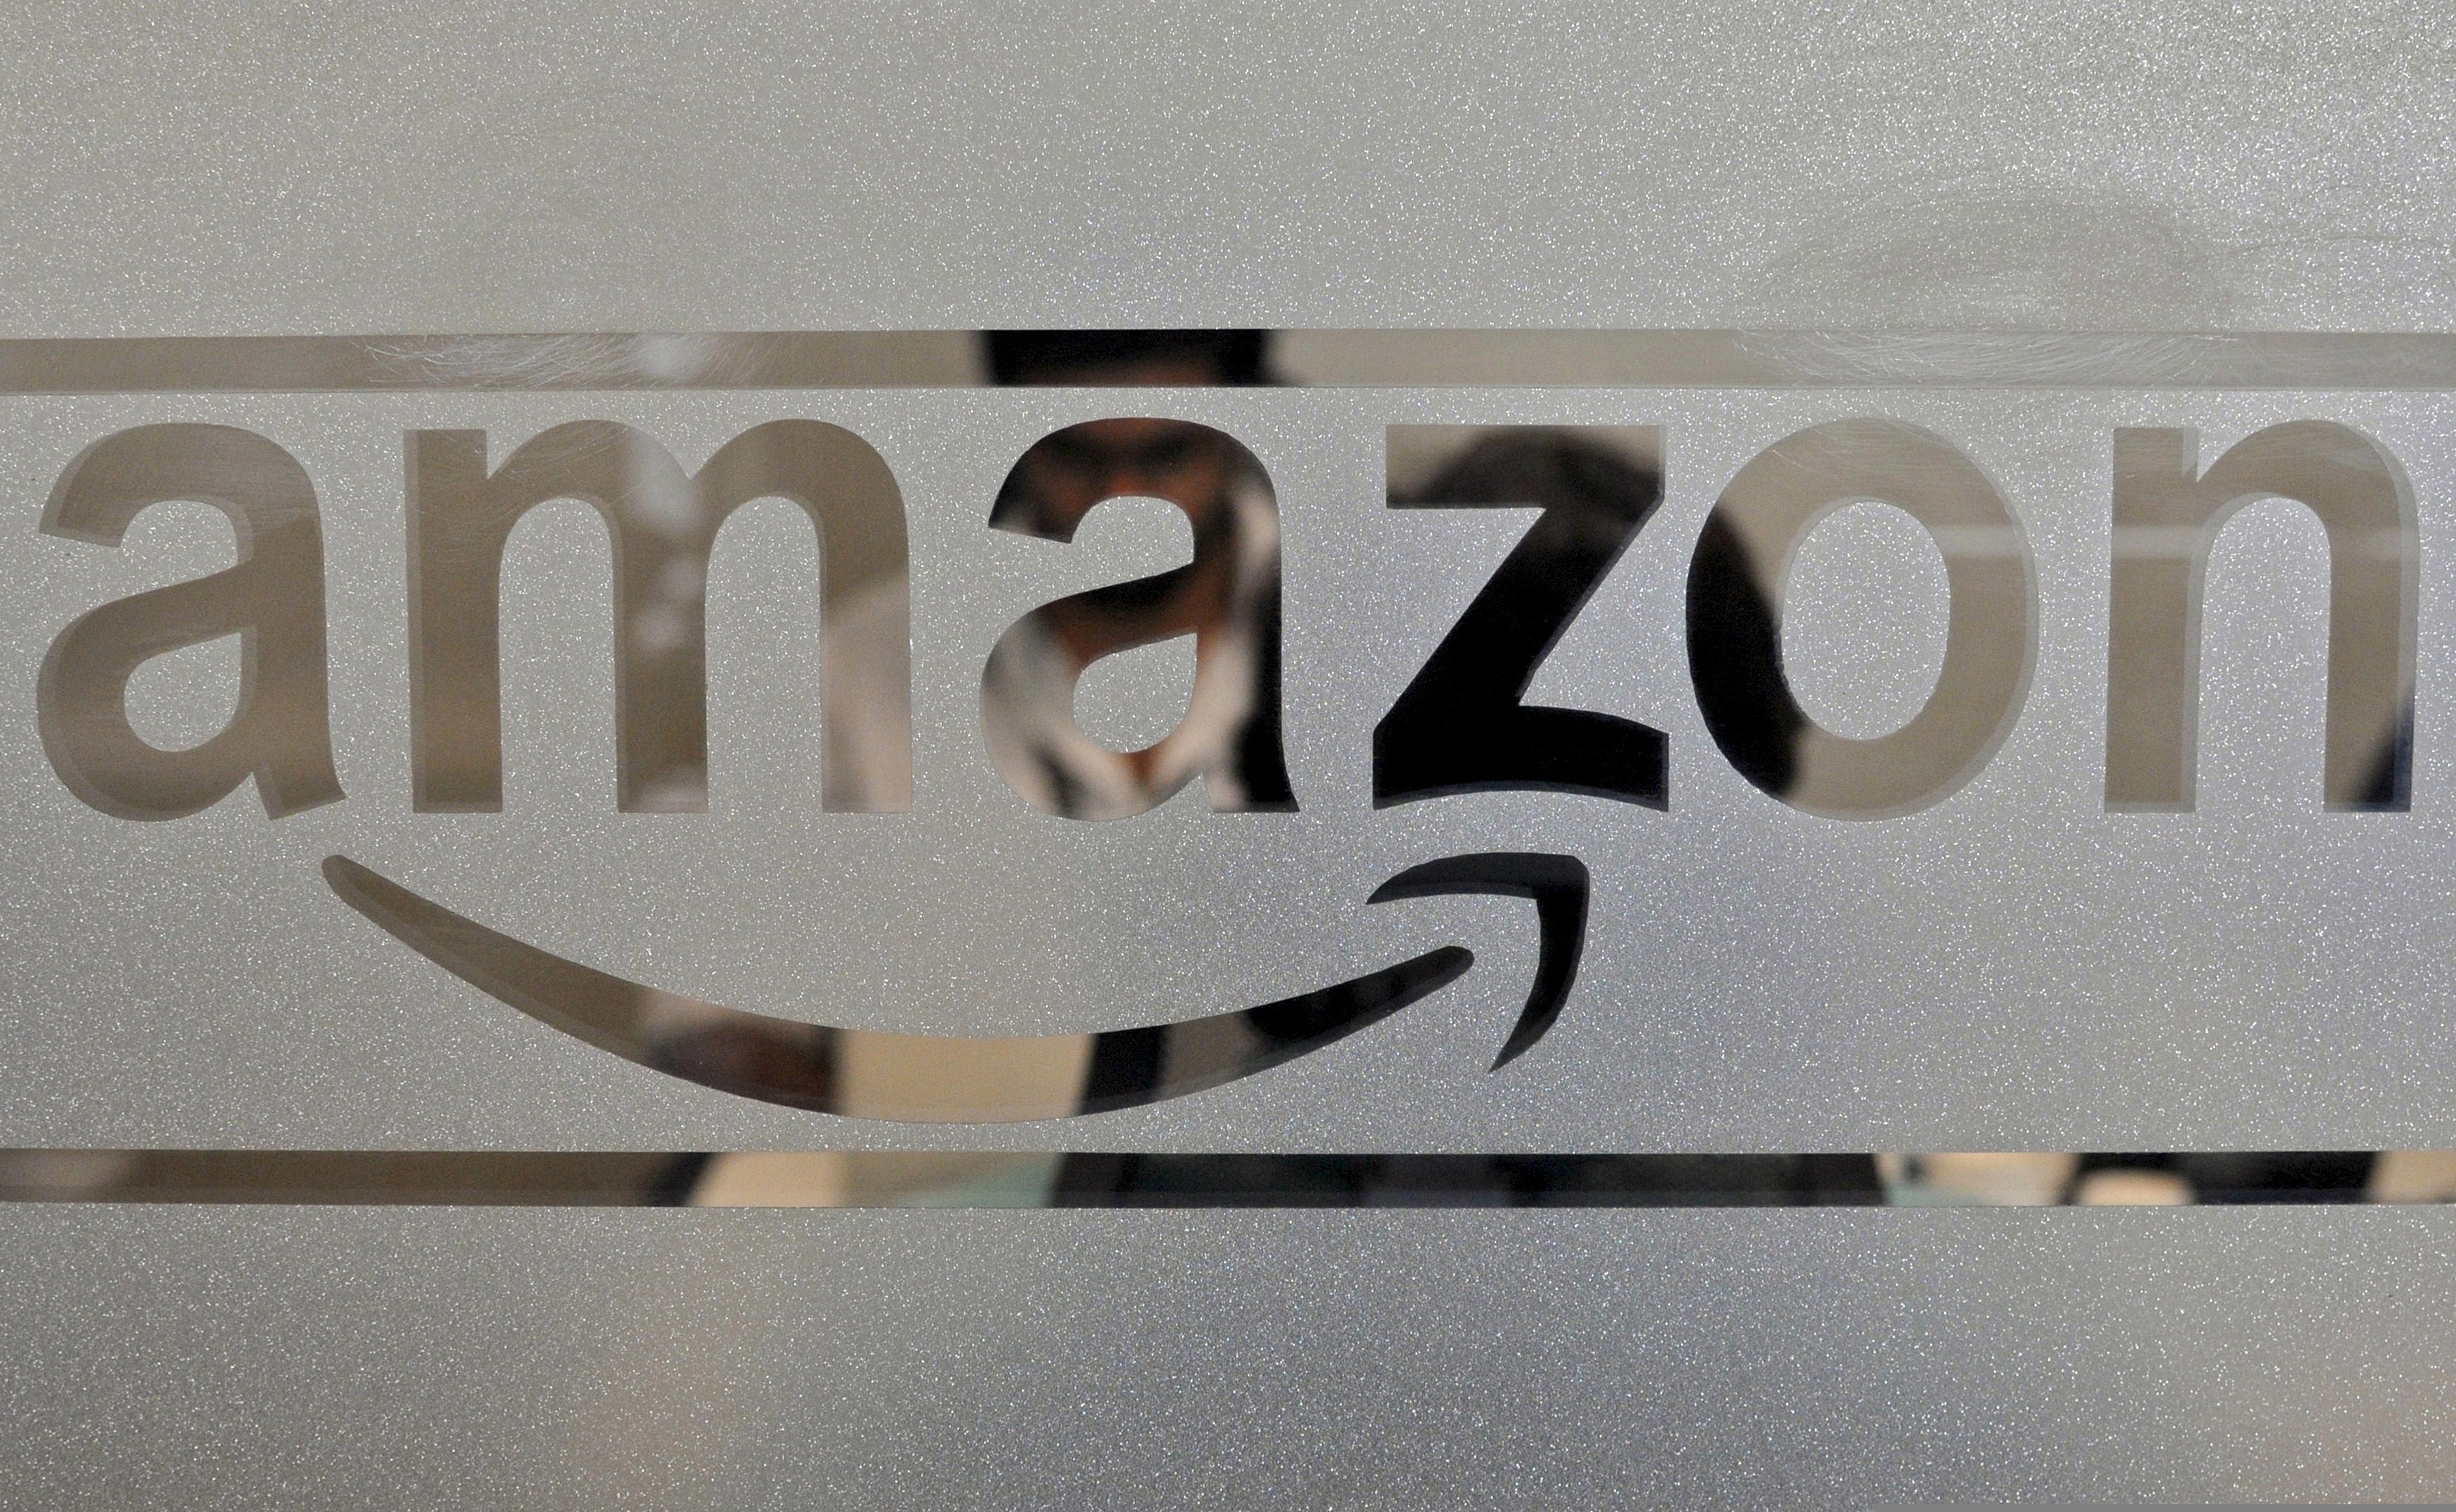 Amazon India plans to launch grocery delivery service by April